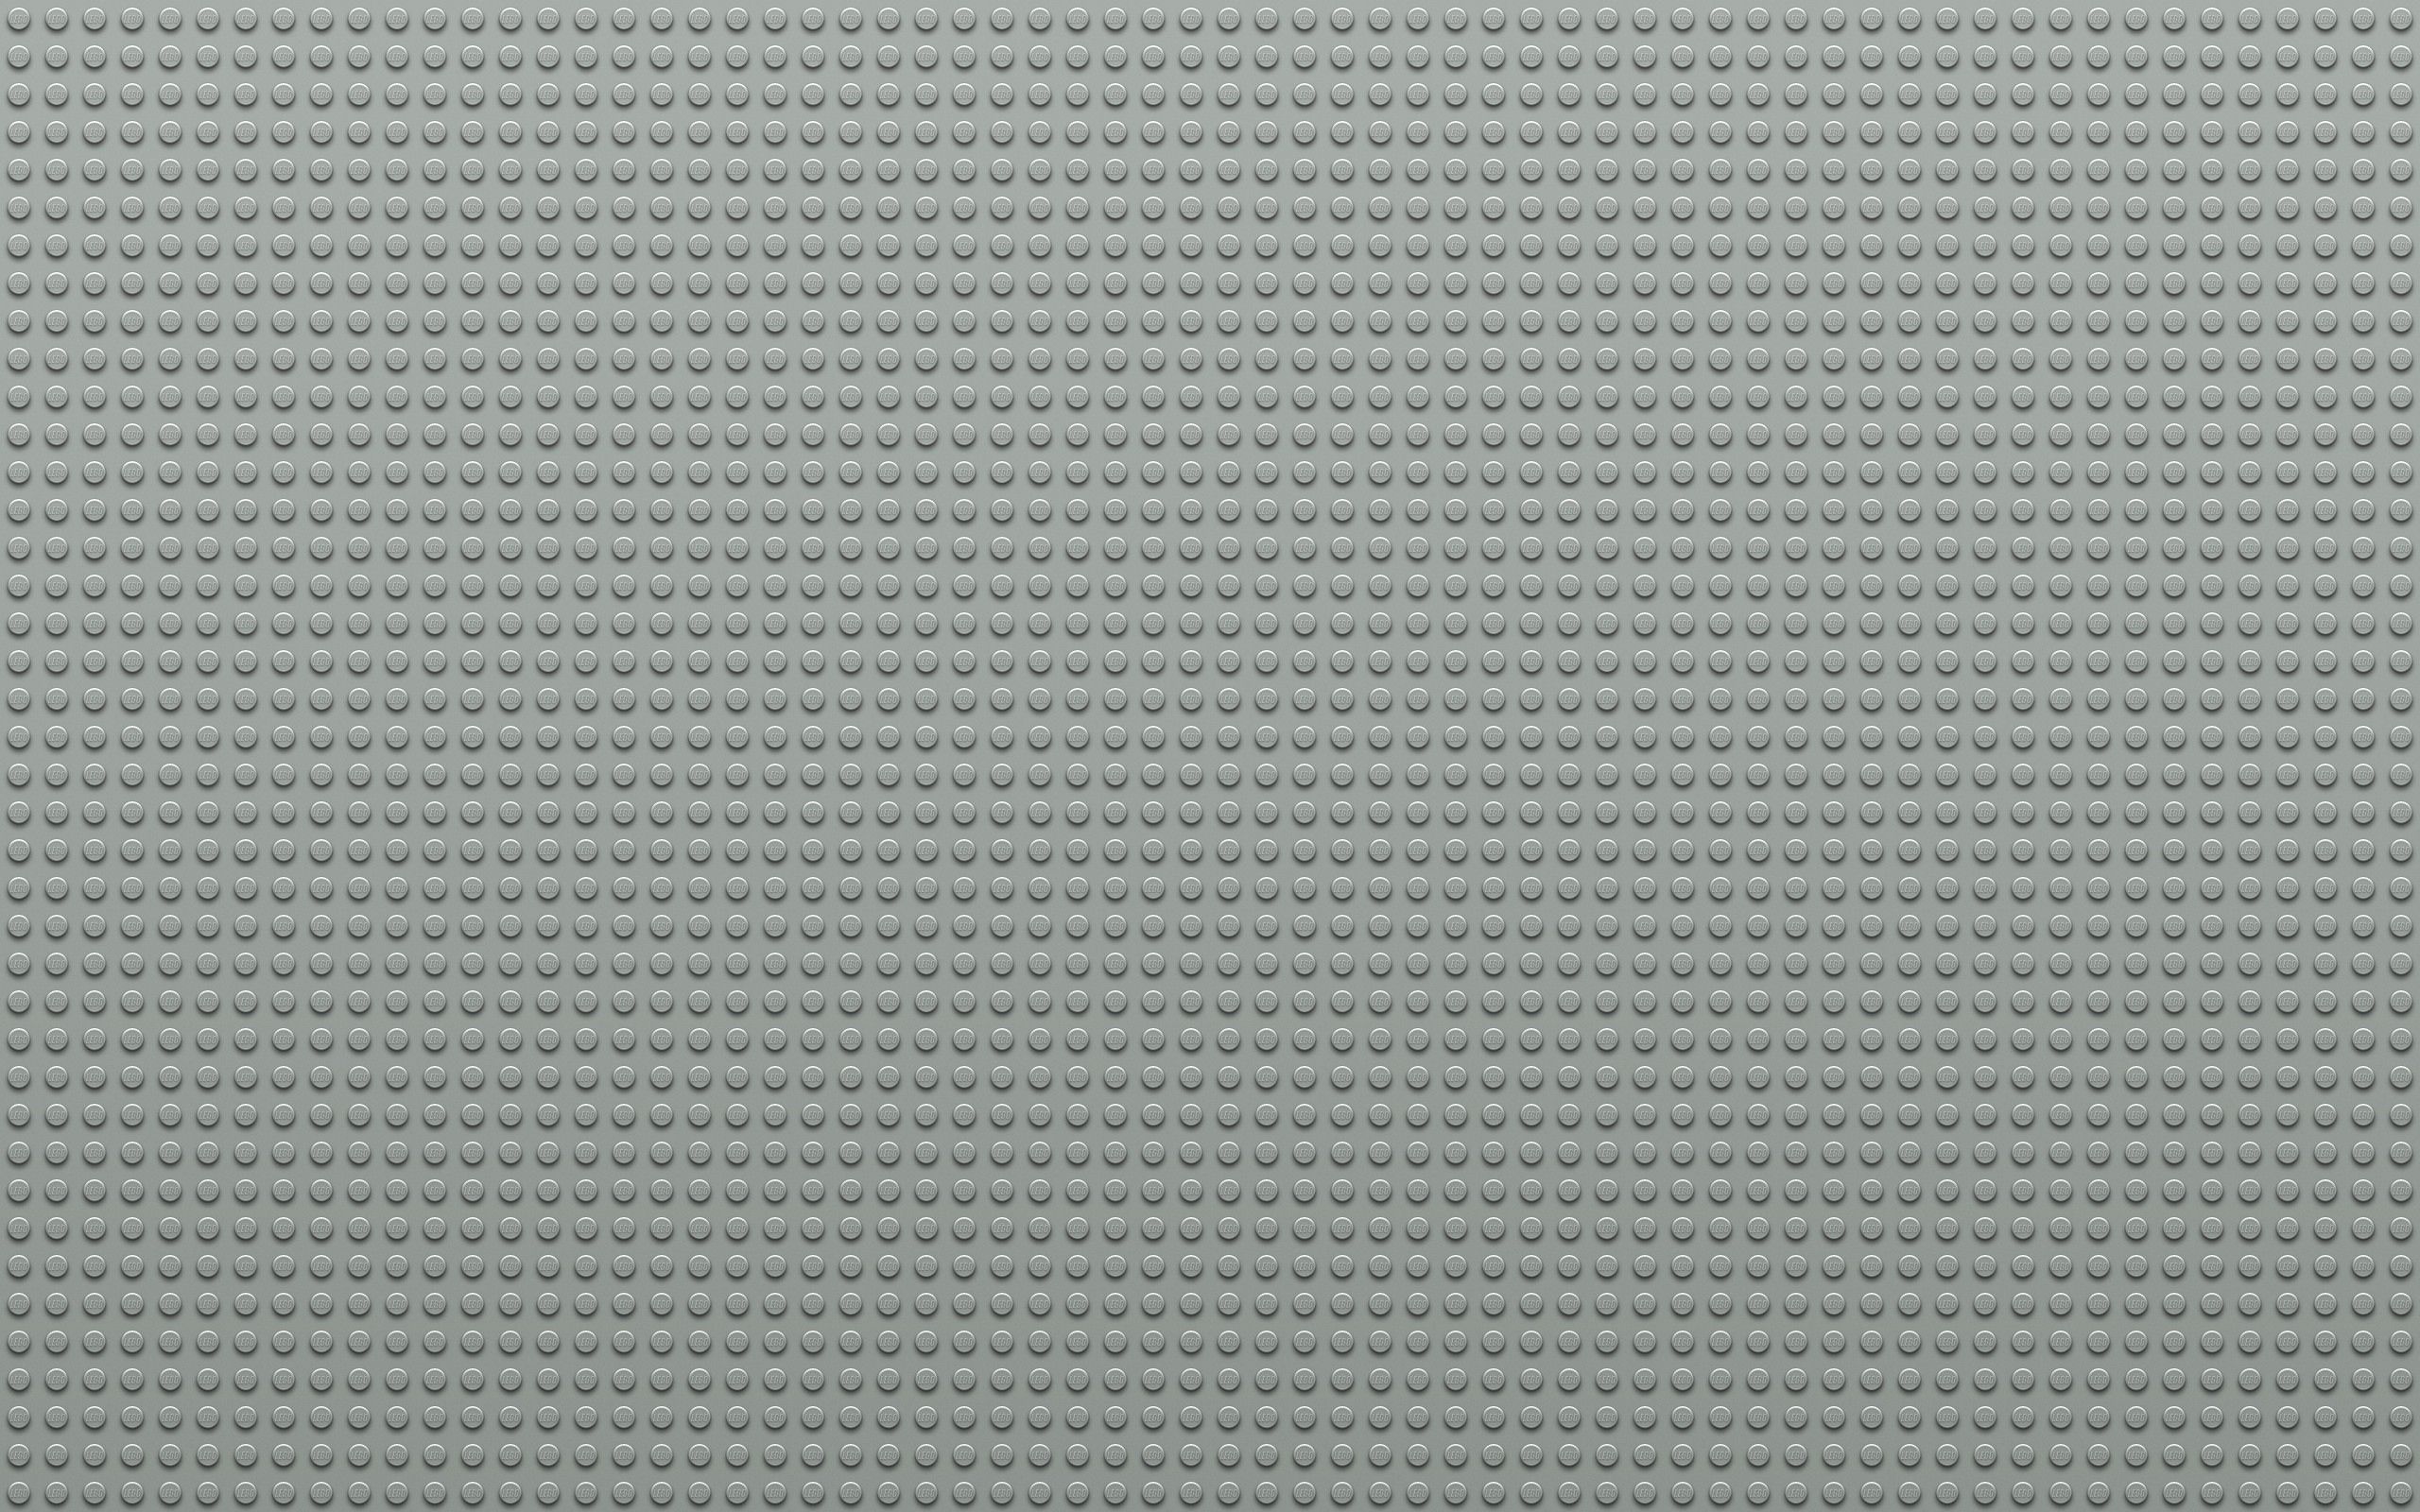 Wallpaper Full HD lego, circles, texture, textures, points, point, light gray